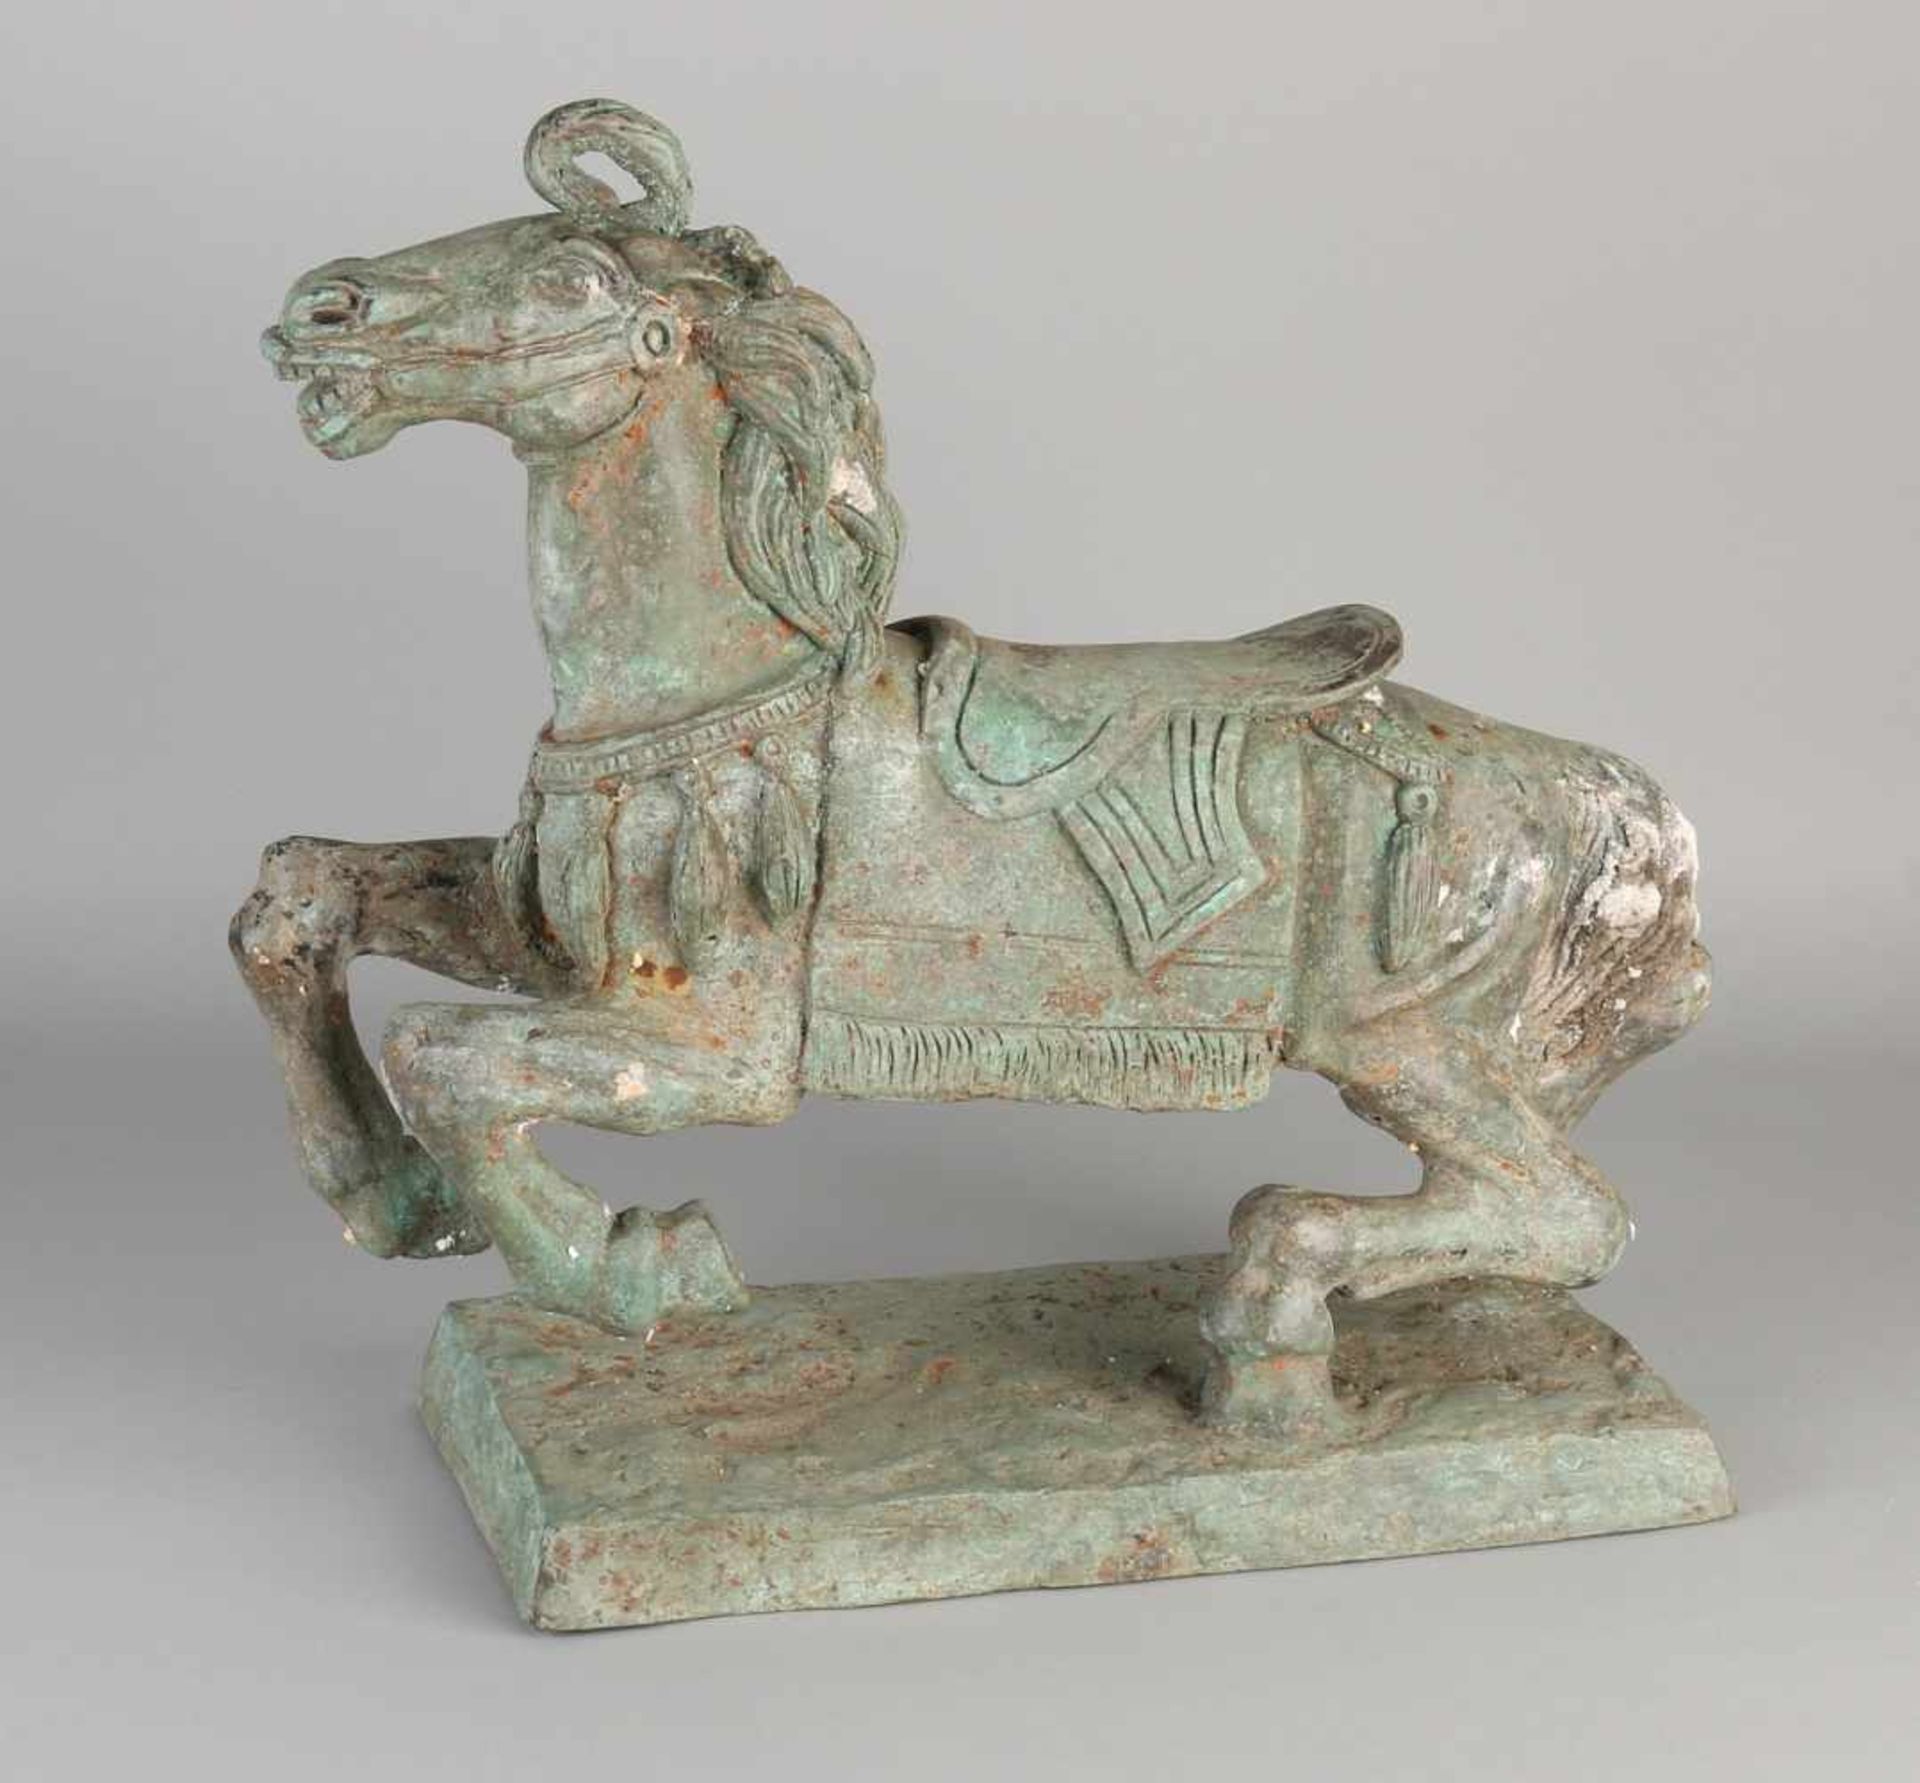 Chinese cast bronze horse in Tang Dynasty style. 20th century. Size: 36 x 40 x 15 cm. In good